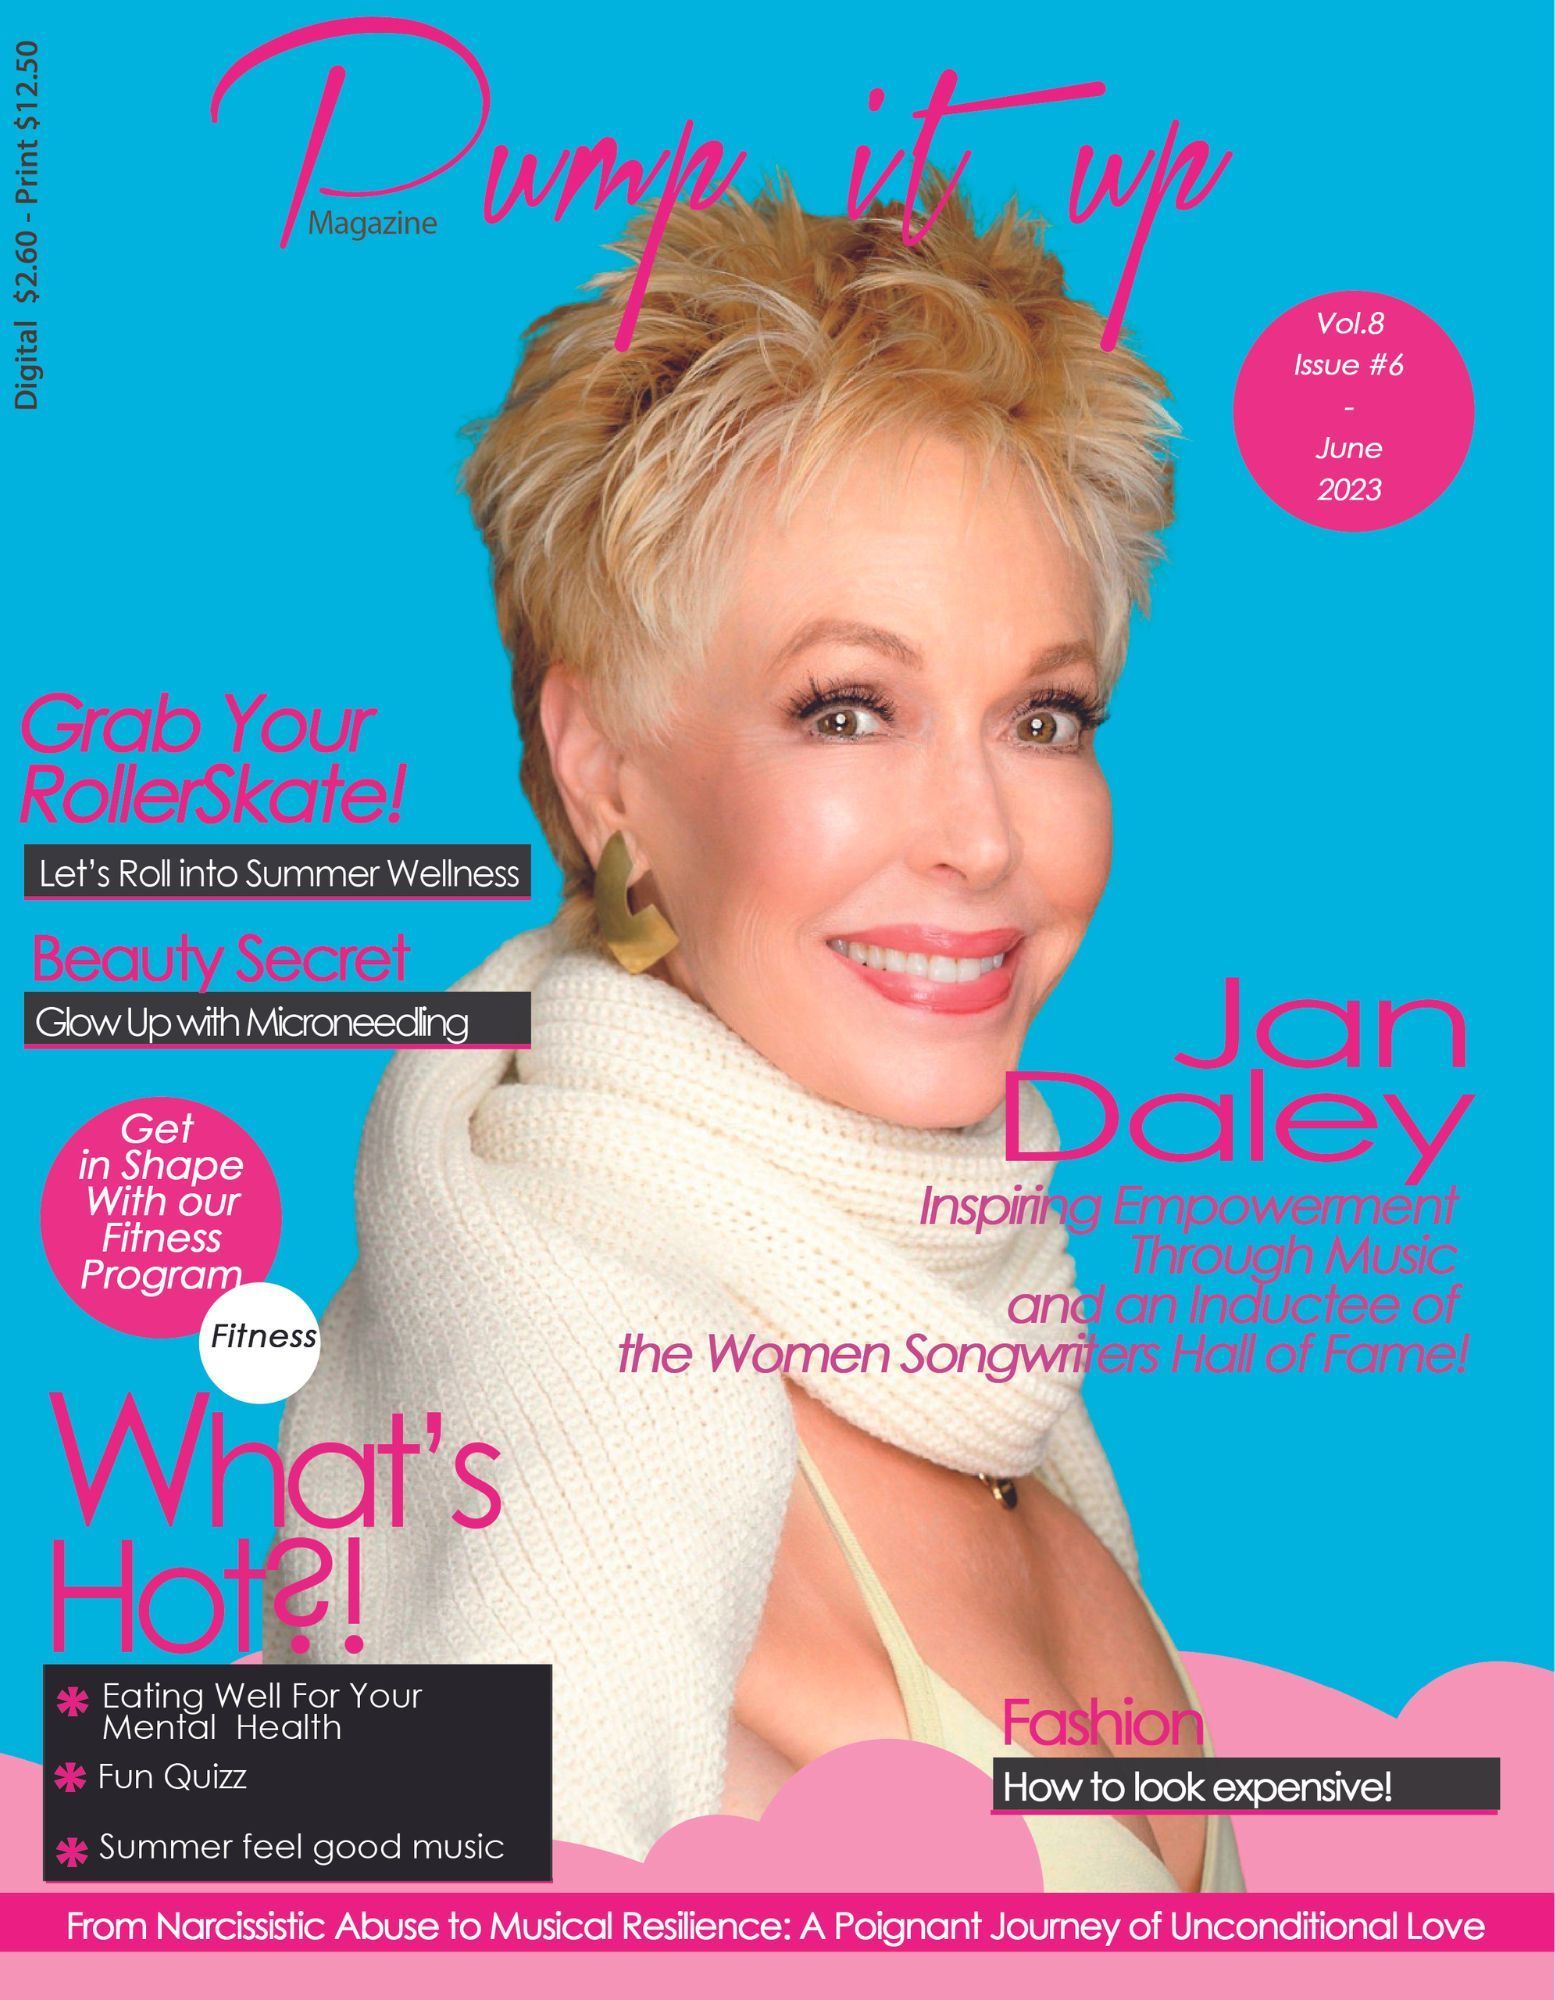 A woman with short blonde hair is on the cover of a magazine.